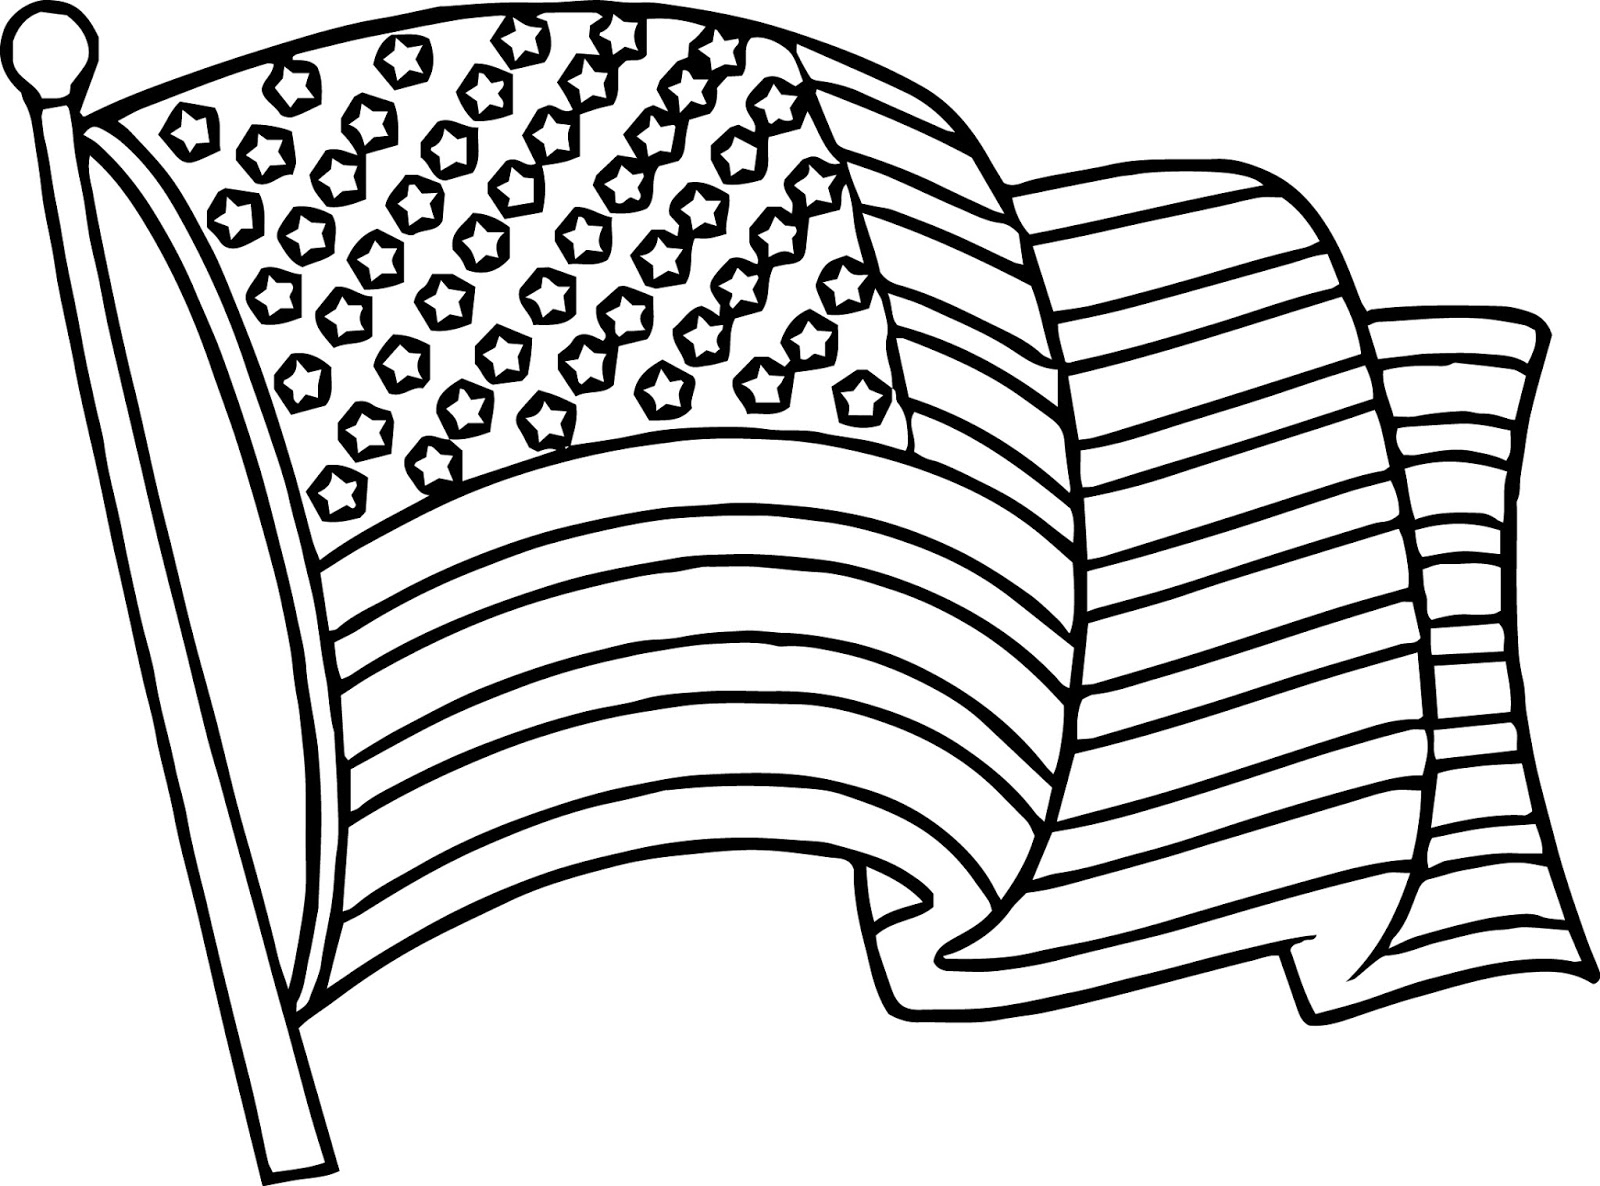 The American Flag Coloring Page American Flag Coloring Pages Best Coloring Pages For Kids